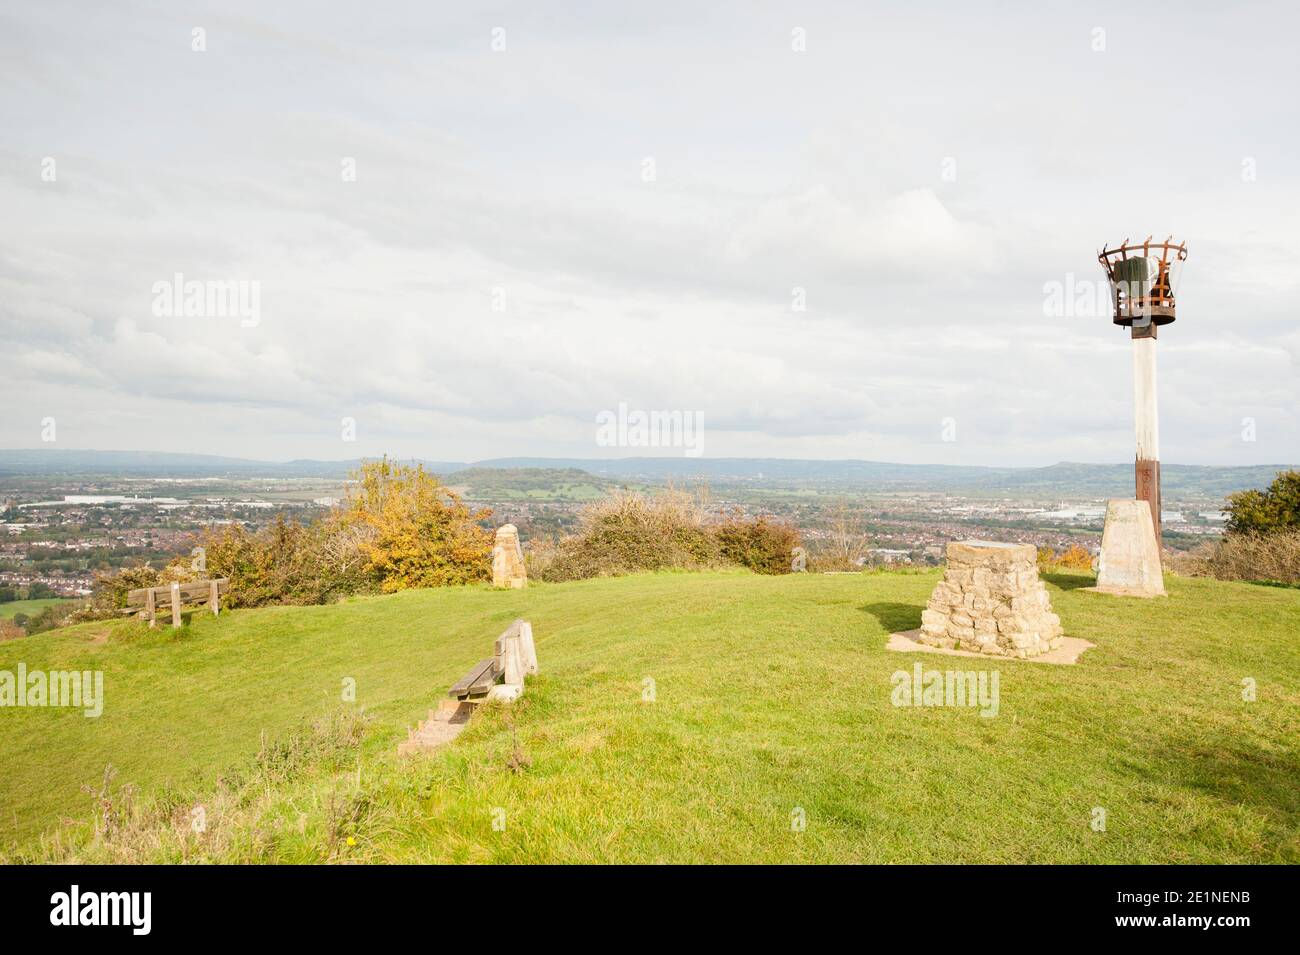 The millennium beacon, trig point and view across the city of Gloucester and beyond from the top of Robinswood Hill Country Park, Gloucester, England, Stock Photo